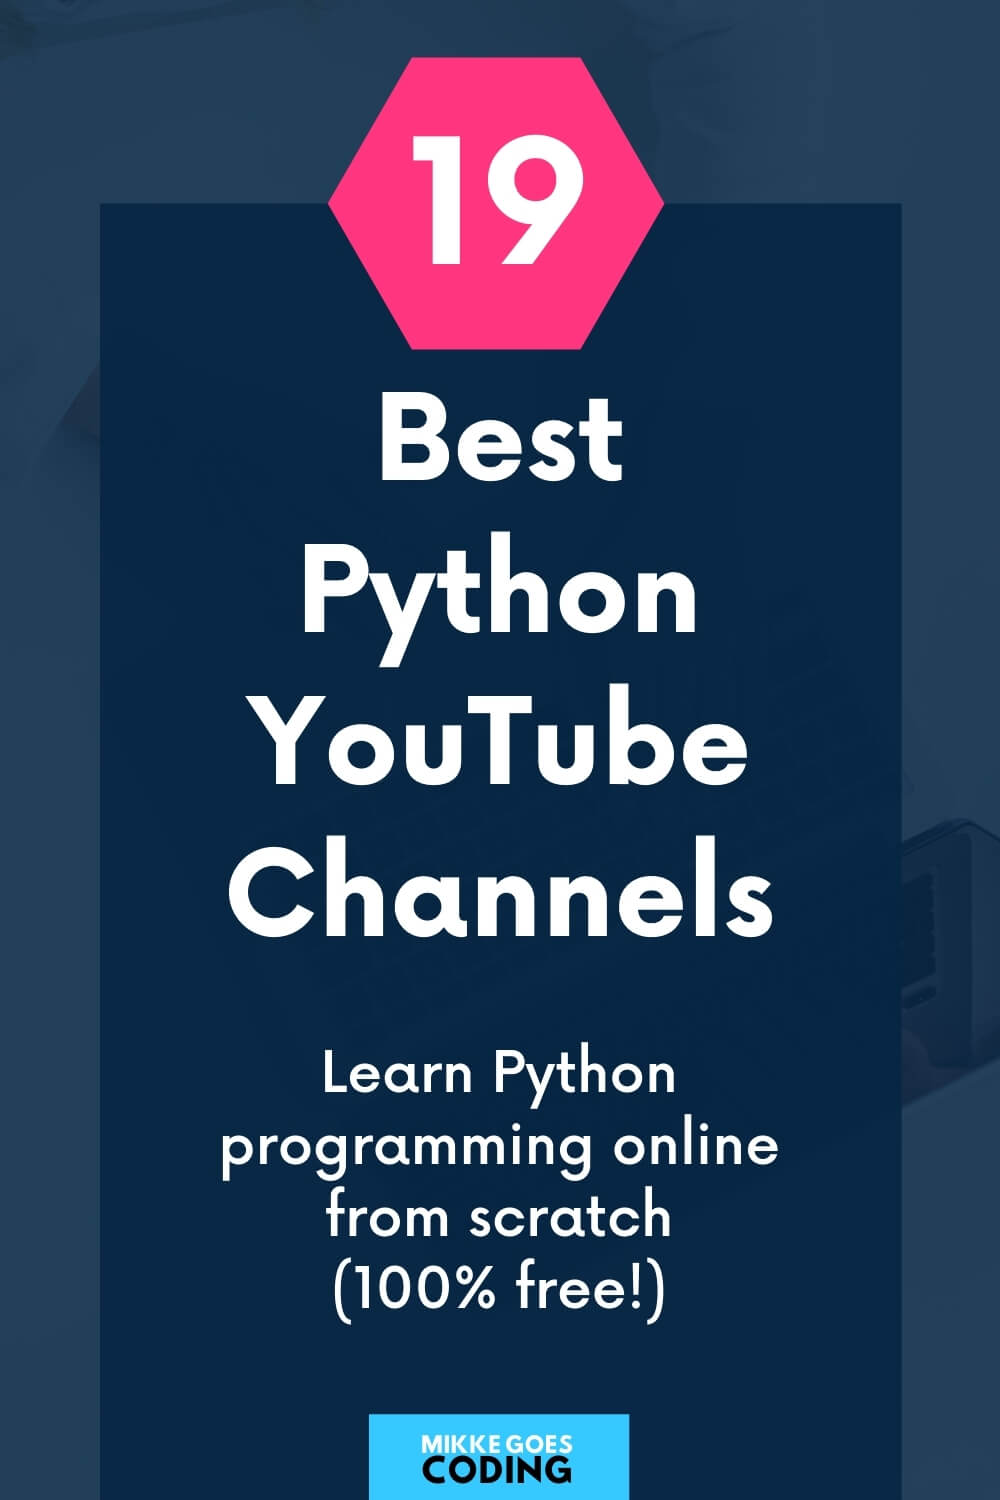 19 Best YouTube Channels to Learn Python in 2022